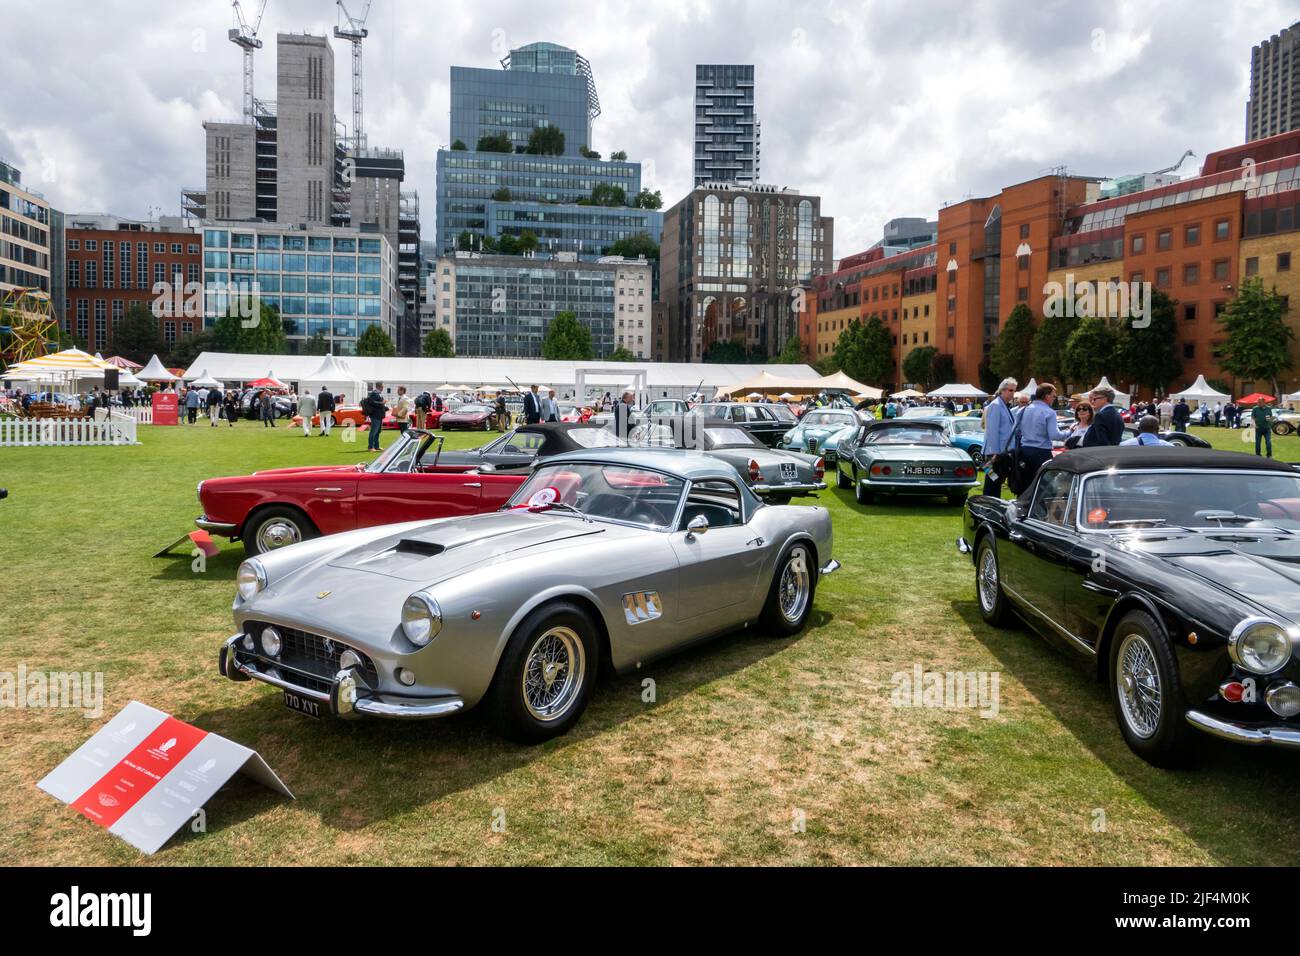 1962 Ferrari 250GT California Spider class winner at the London Concours at the Honourable Artillery Company in the City of London UK Stock Photo